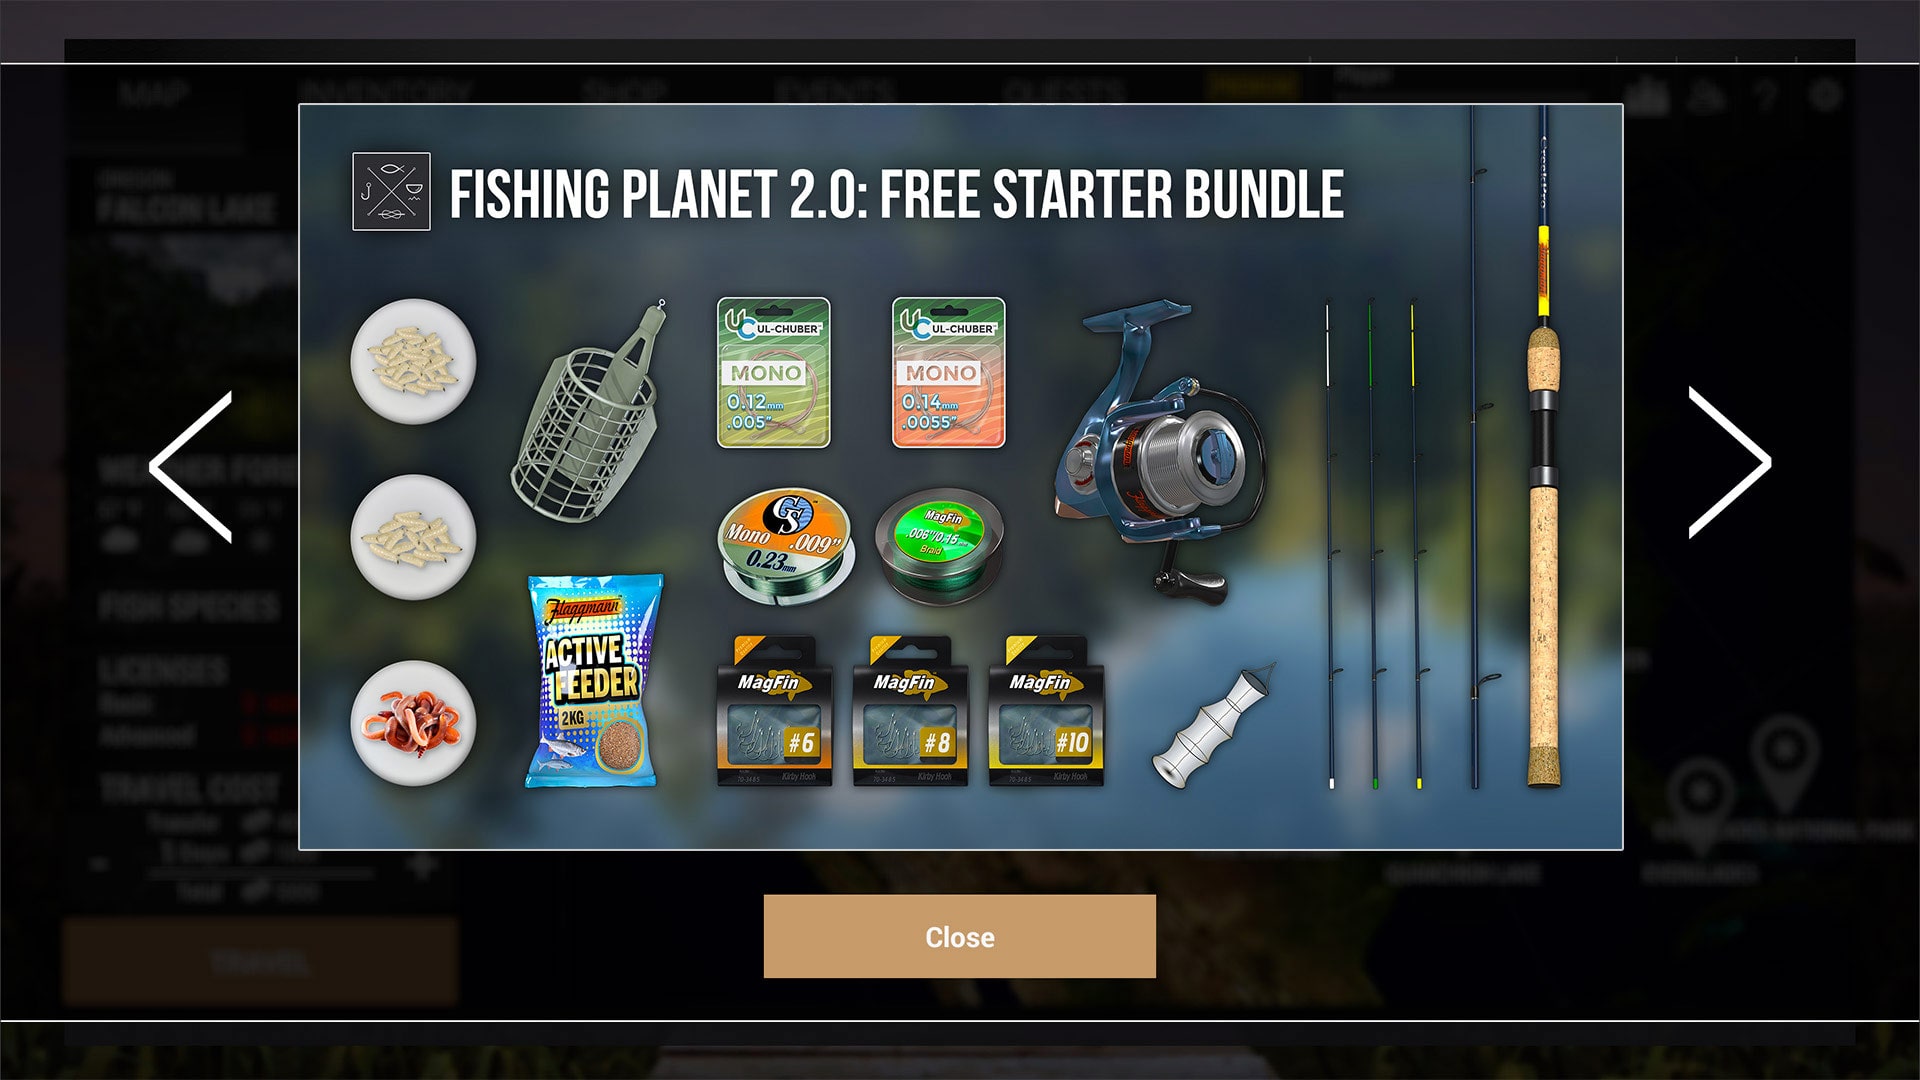 Planet 2.0: Free Starter Bundle by Fishing - (PlayStation Games) —